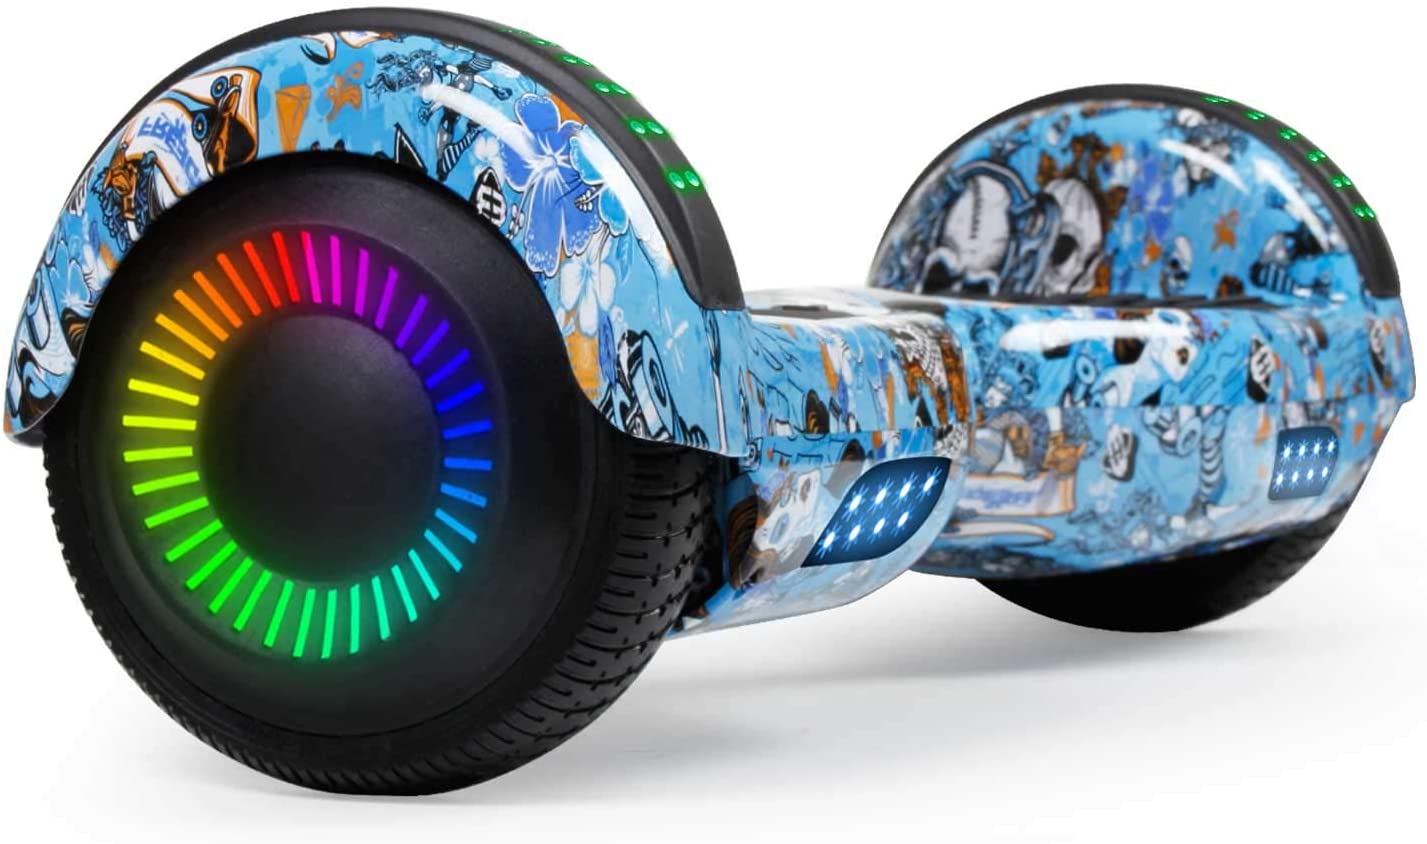 Hoverboard, UL2272 Certified, with Bluetooth and Colorful Lights Self Balancing Scooter - Skull